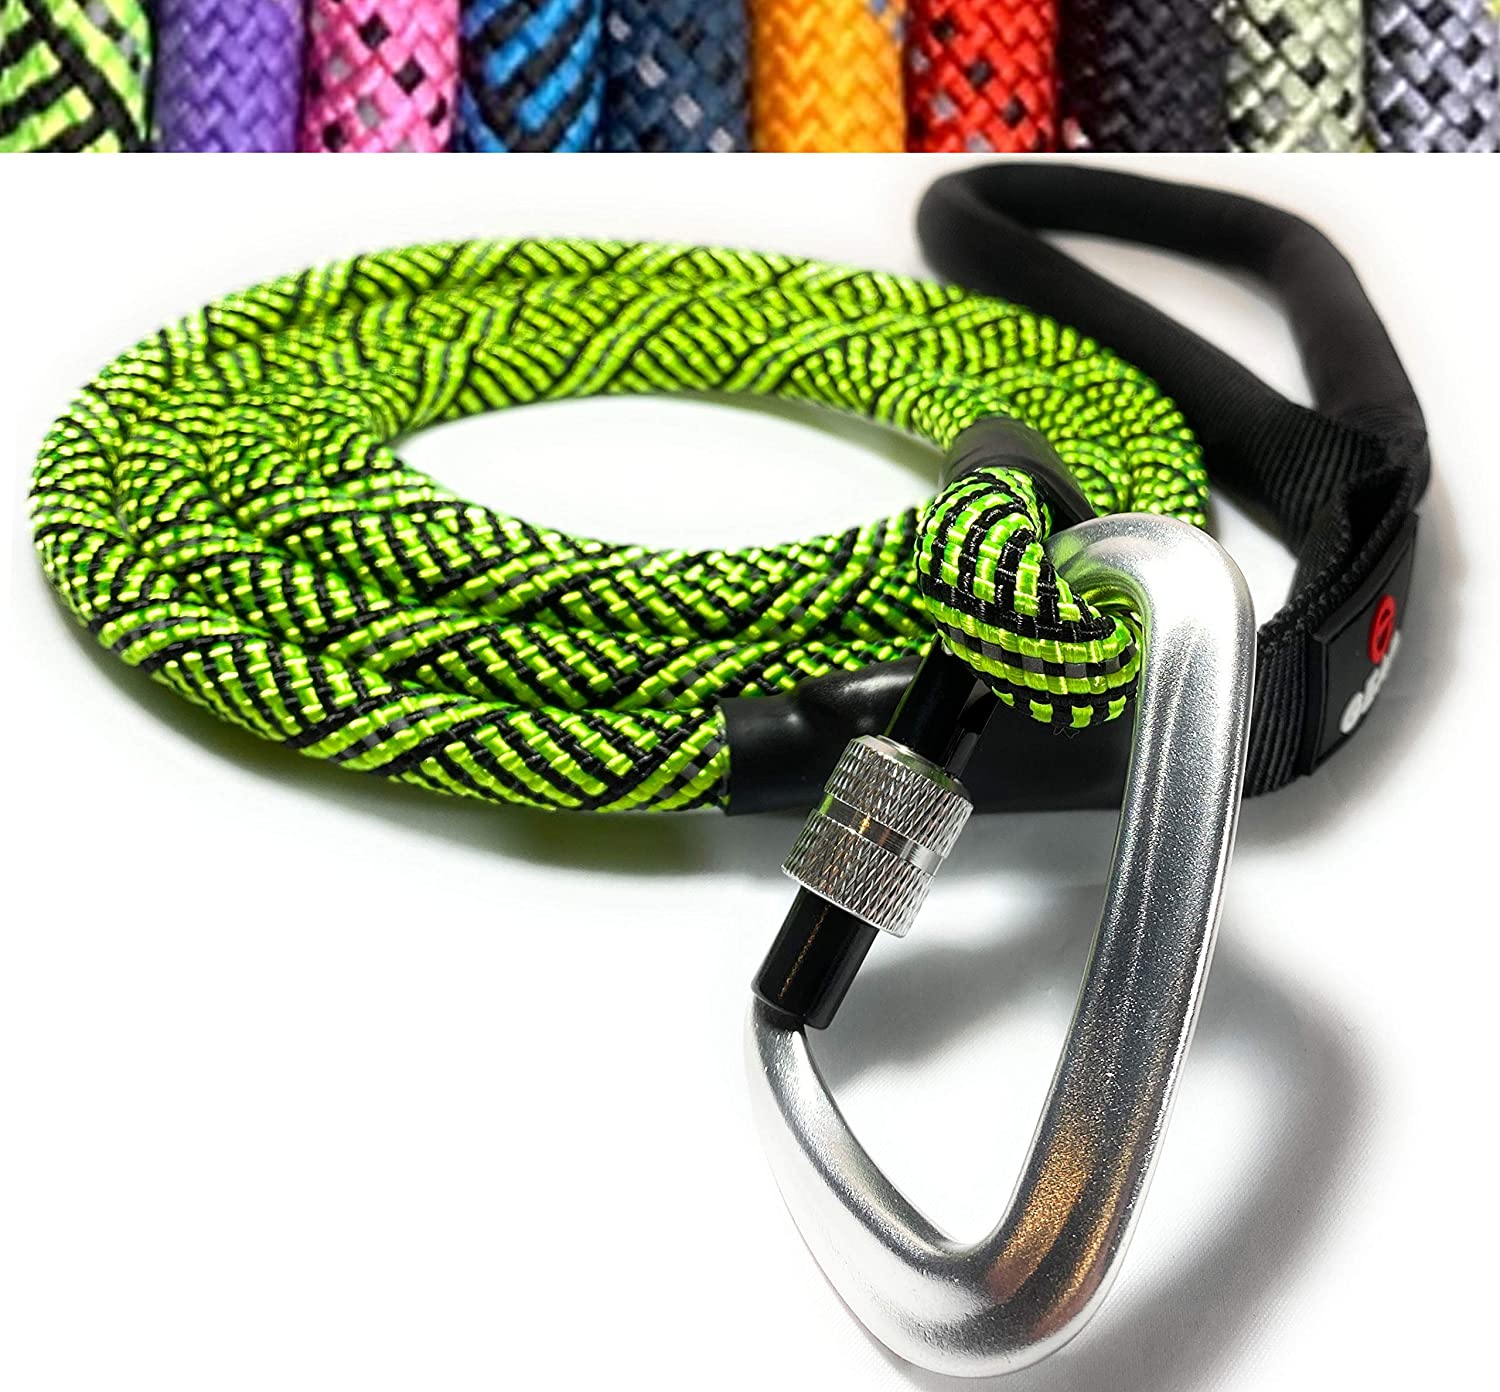 Climbing Rope Dog Leash with Locking Carabiner - Bright Green